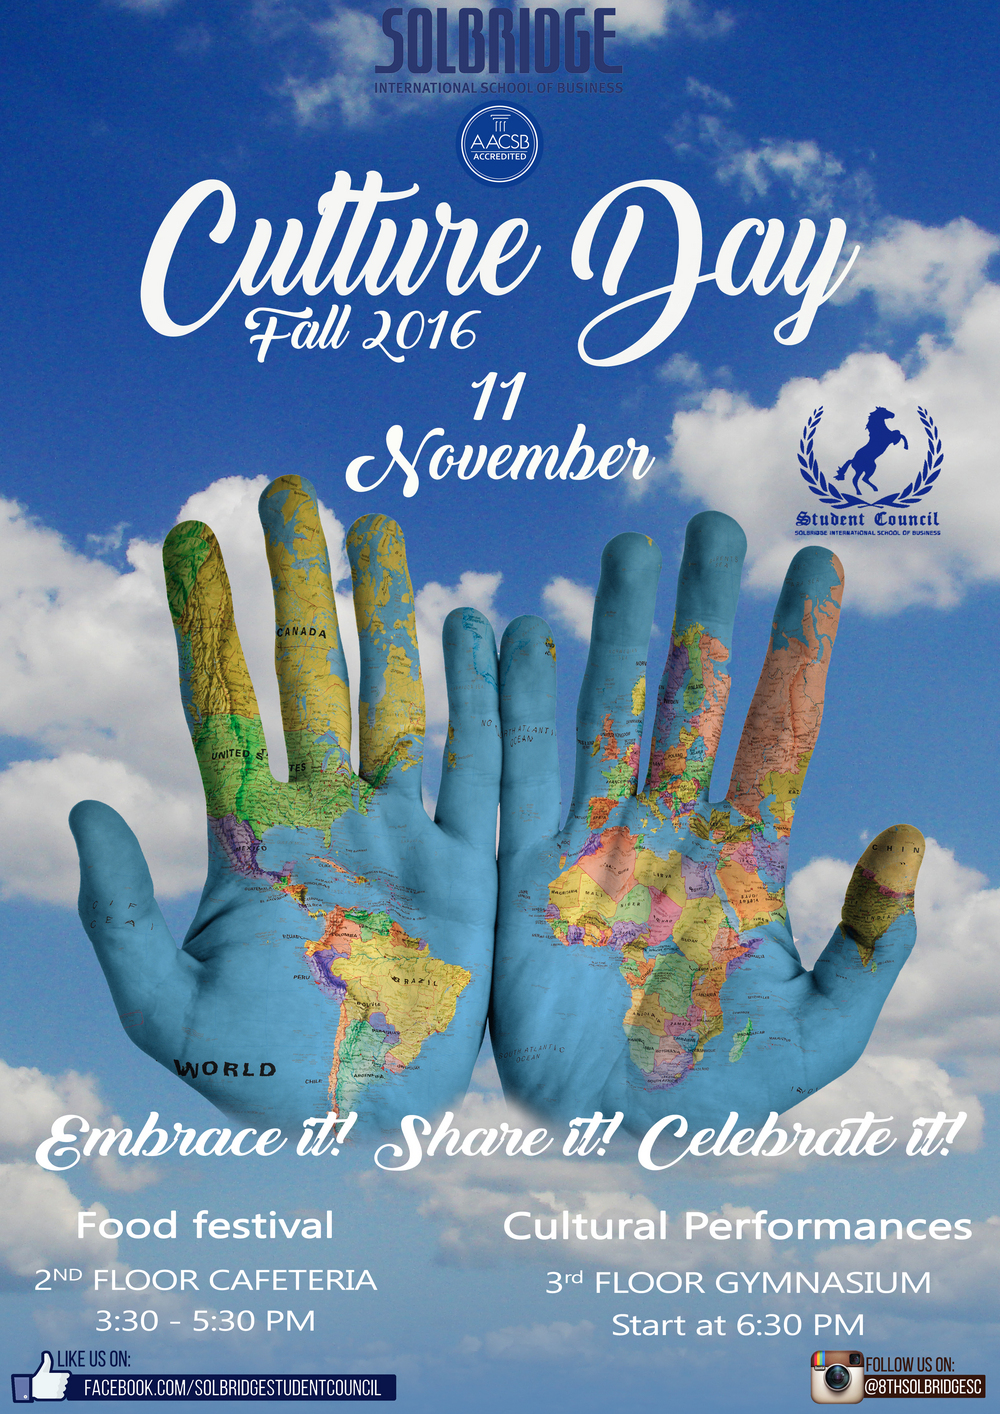 Coming Soon: Culture Day 2016